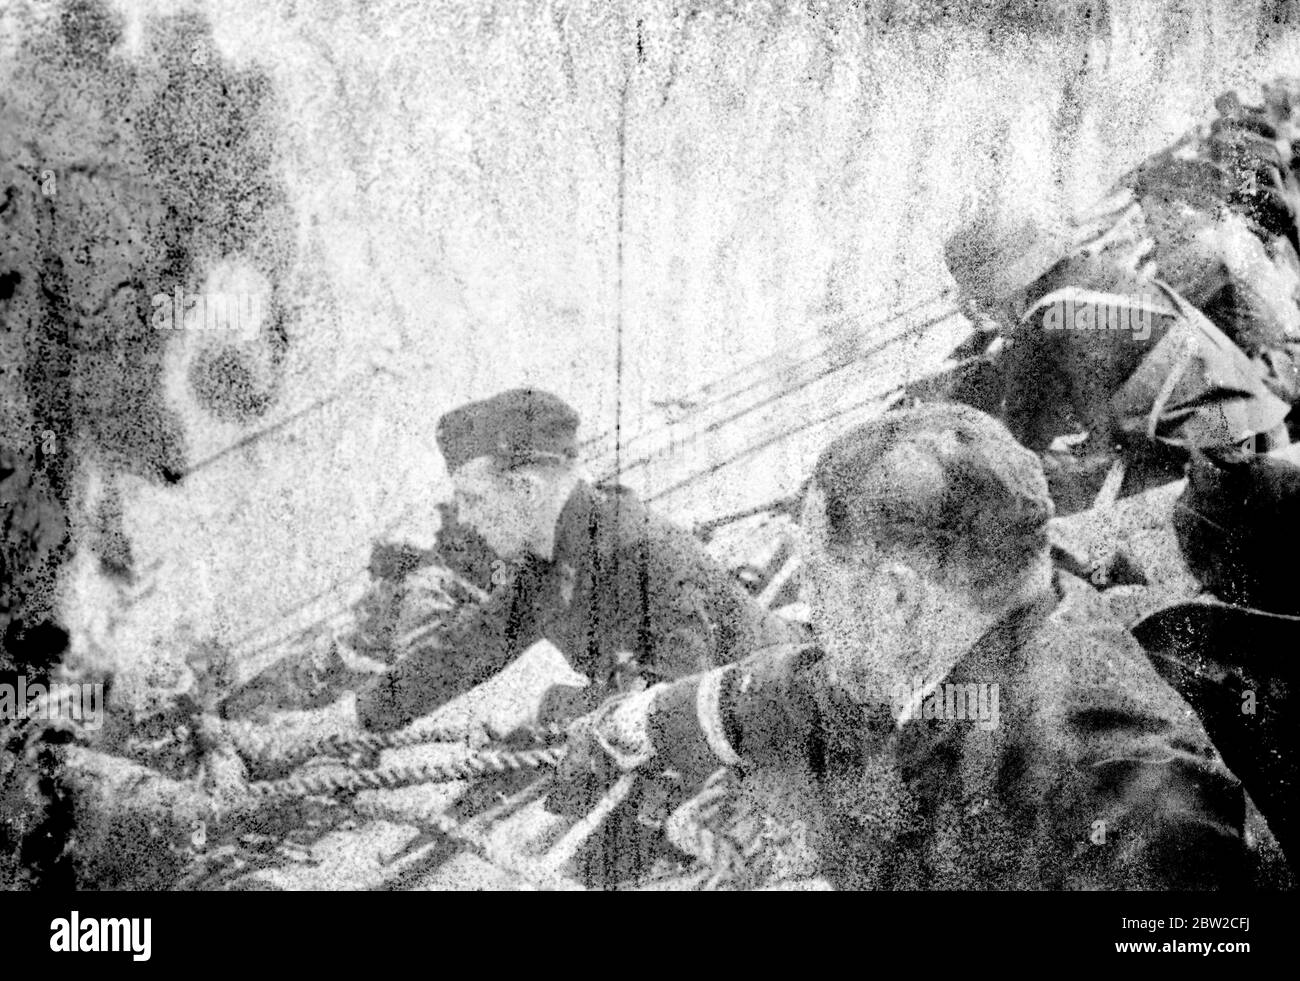 British sailors being hauled aboard a German warship after their vessel had been sunk in a battle against heavy odds. 24 April 1940 Stock Photo